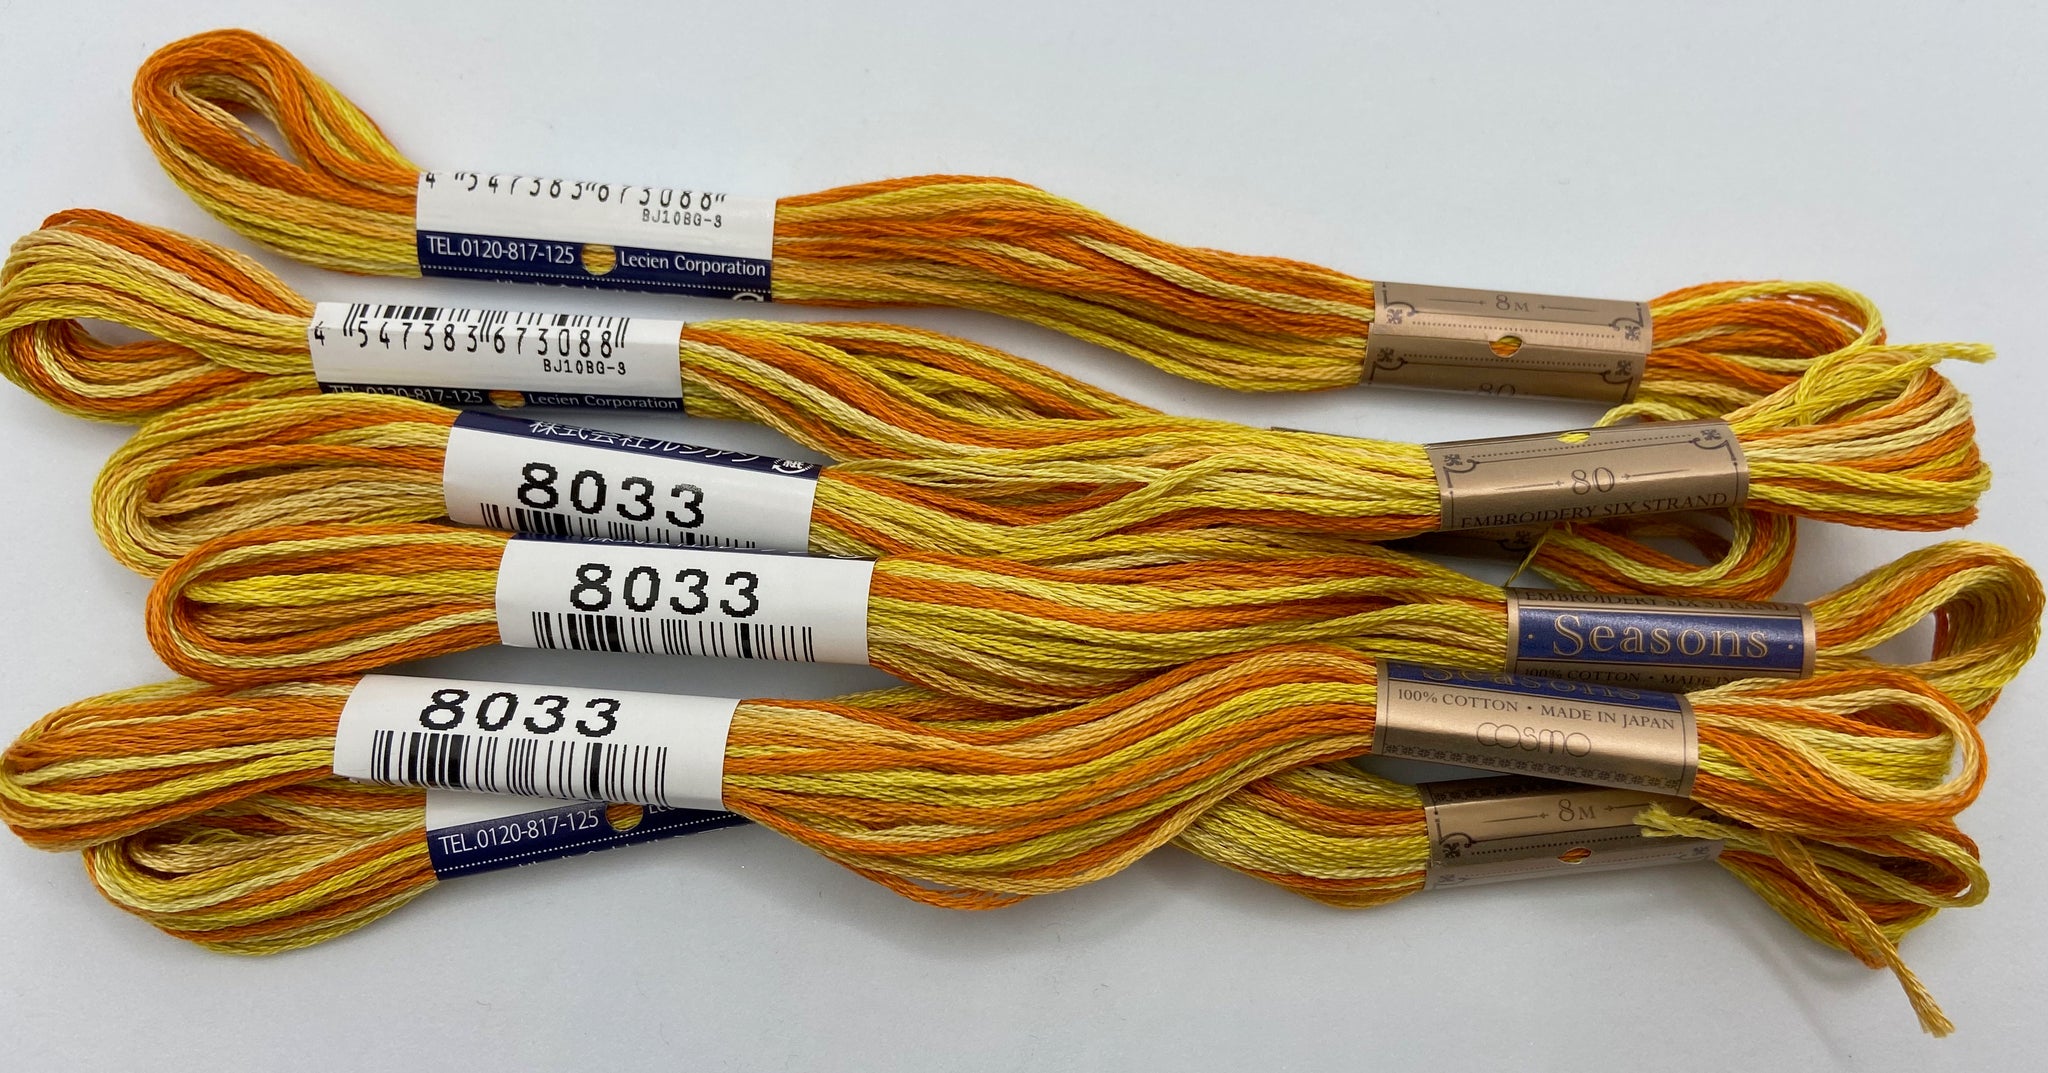 Cosmo Seasons Variegated Embroidery Floss / 8039 Browns